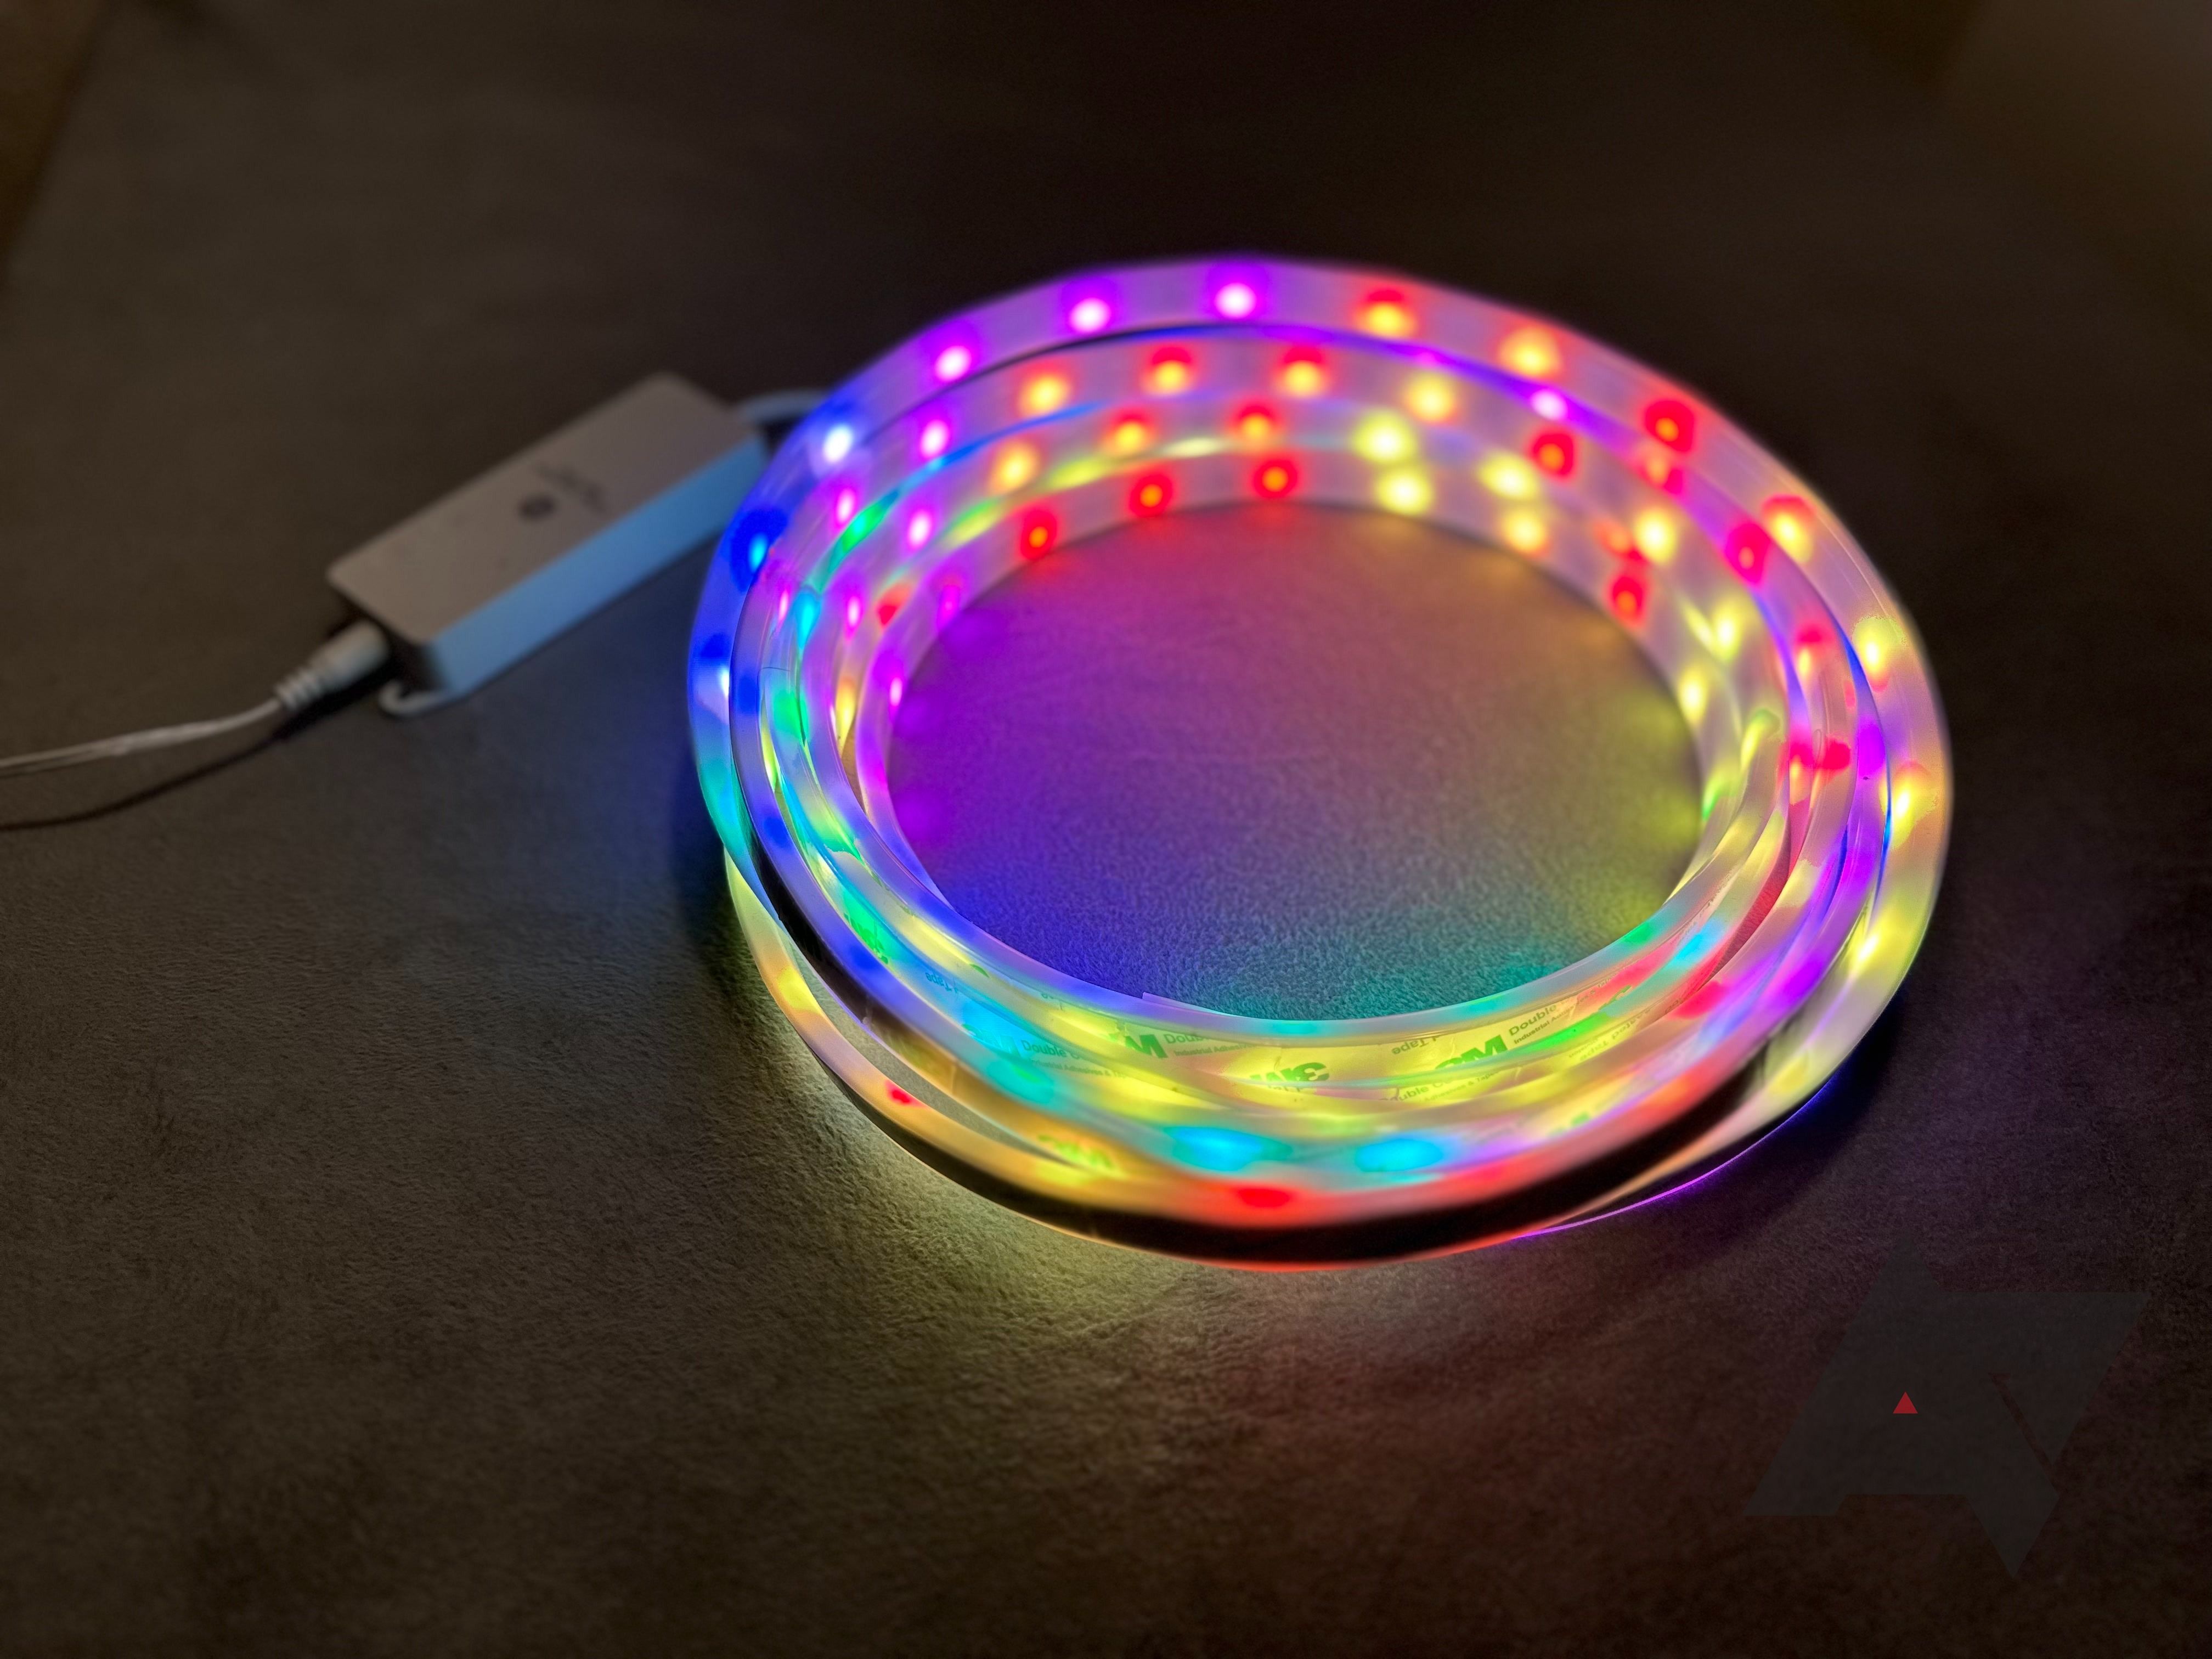 GE's Cync Full Color Dynamic Effects Smart Light Strip coiled up, with RGB lights on.